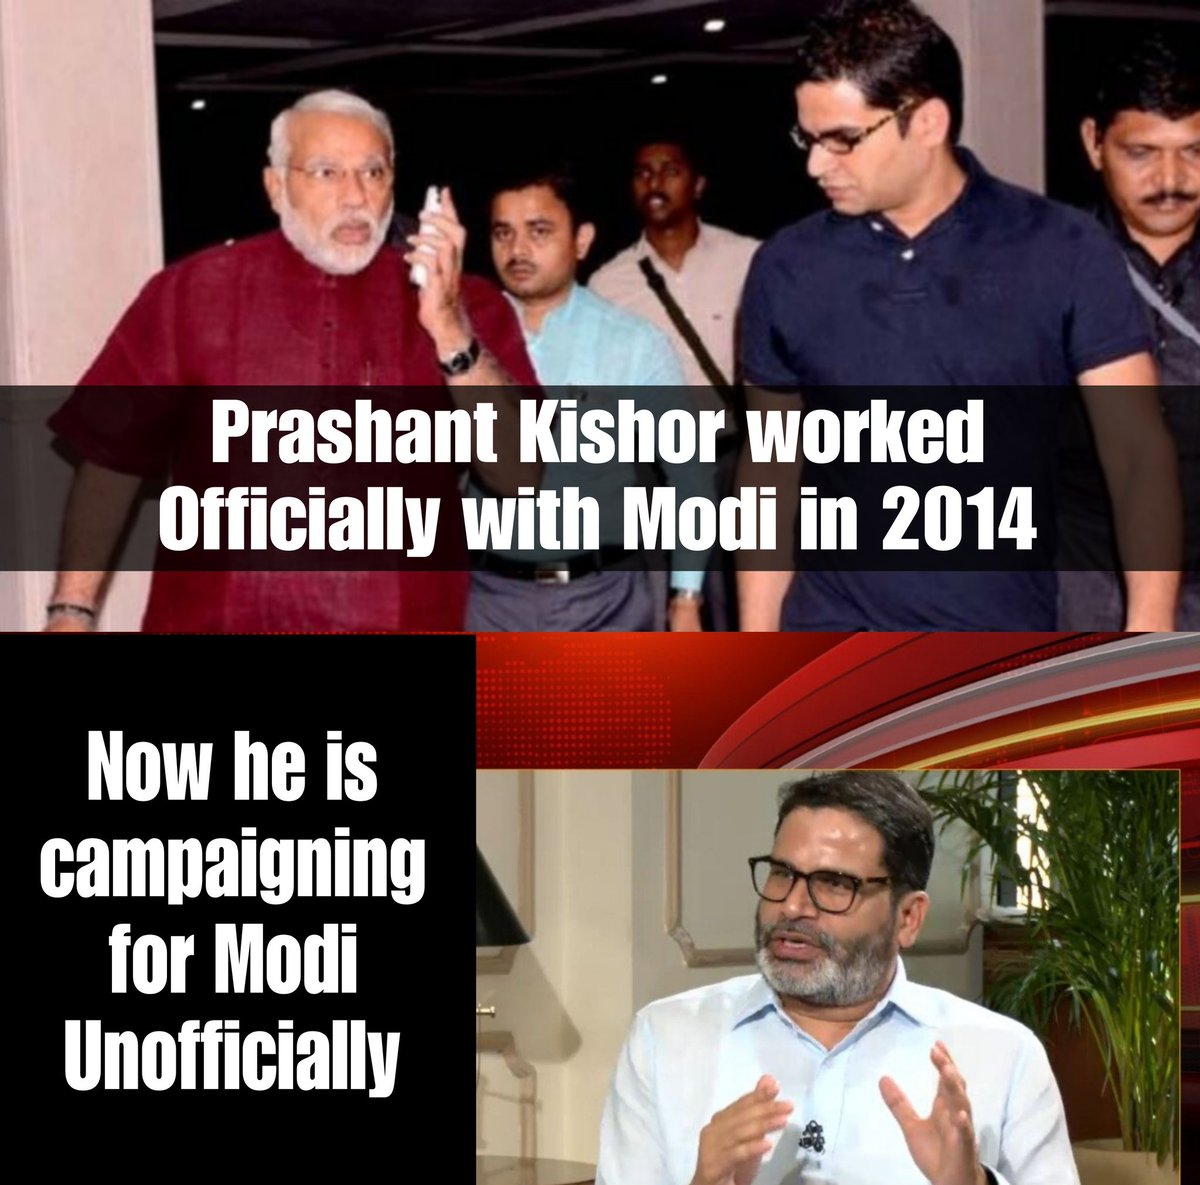 Prashant Kishor is campaigning for Modi Unofficially now giving interviews to Godi media & promoting Modi.. Be aware of snakes like him.